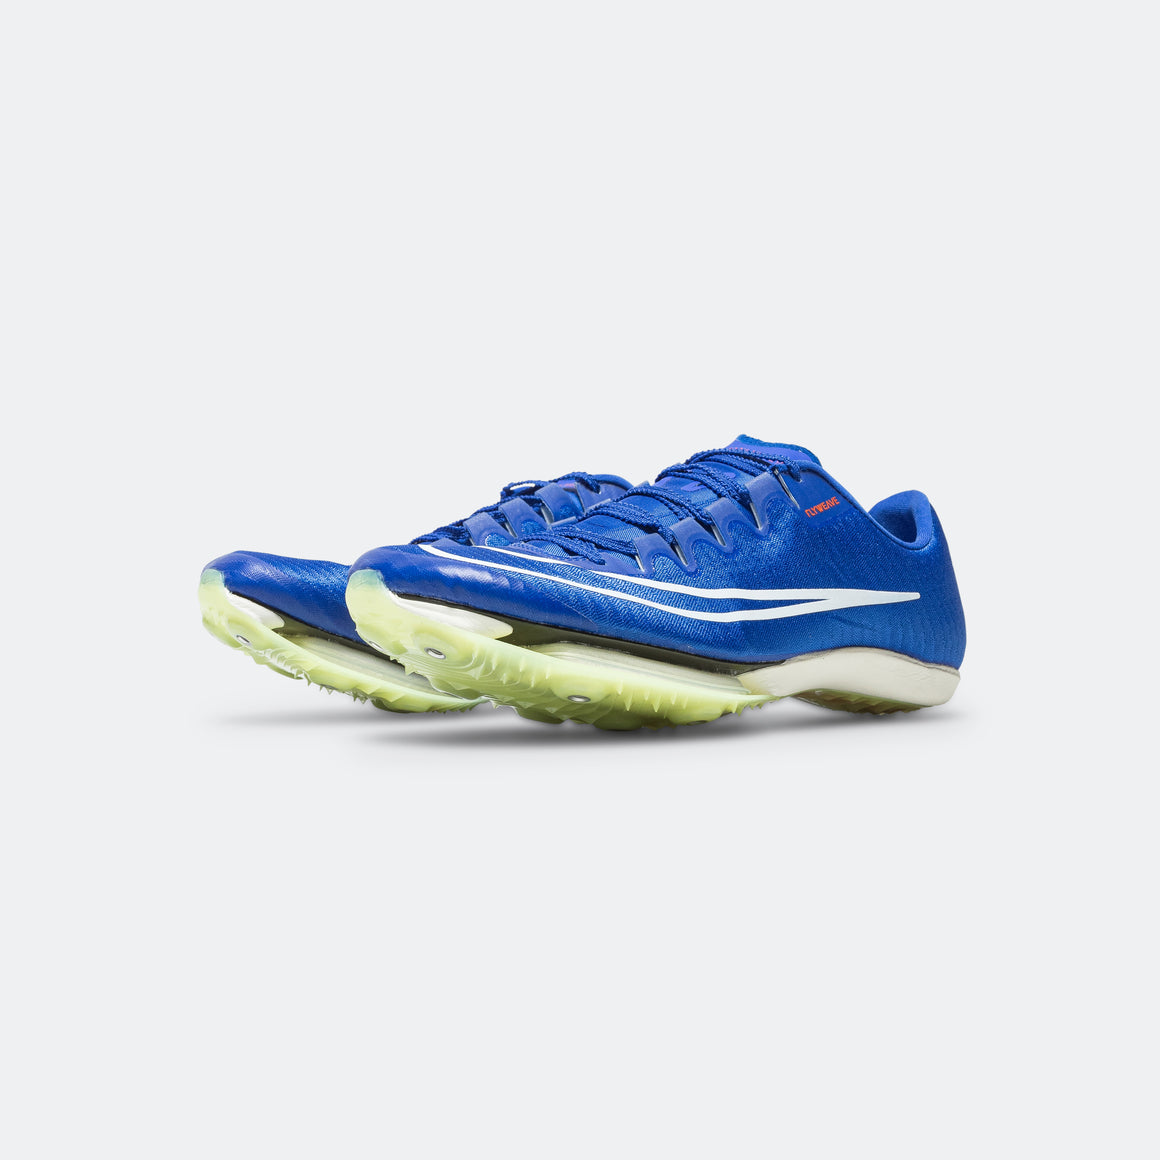 Nike - Air Zoom Maxfly - Racer Blue/White-Lime Blast - Up There Athletics